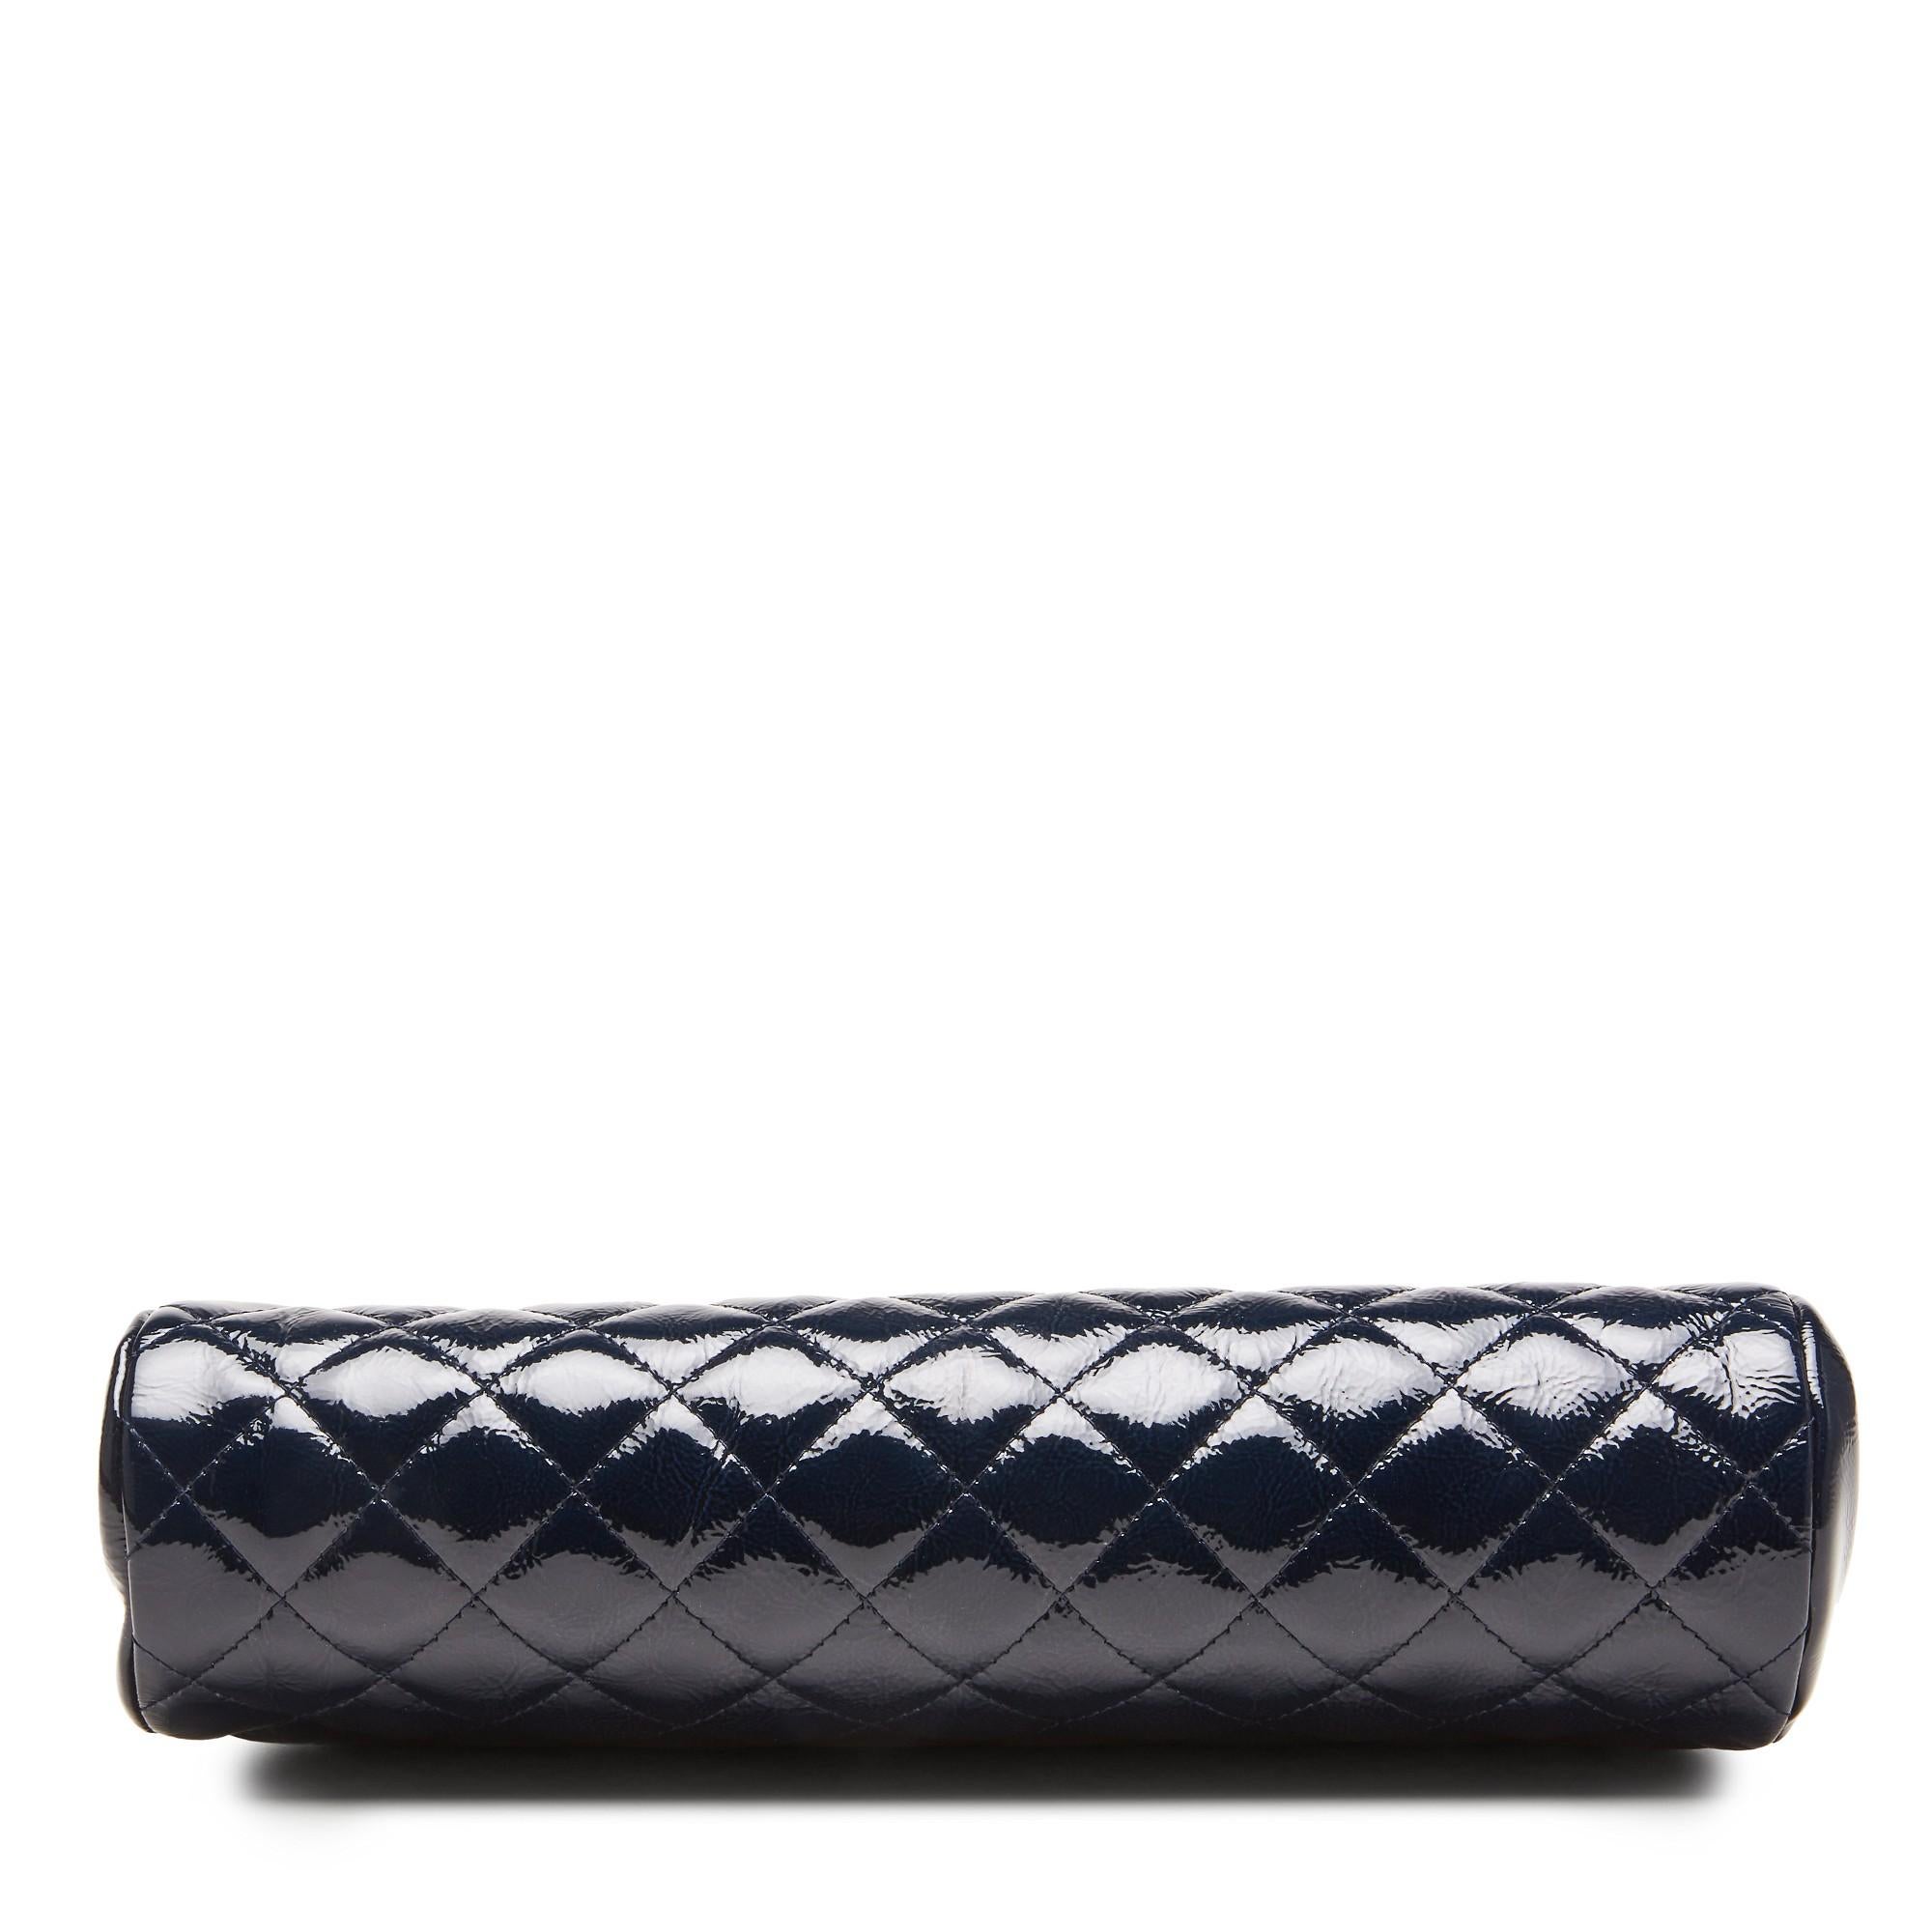 Chanel 2007 Classic Vintage Navy Blue Patent Diamond Quilted Timeless Clutch Bag im Angebot 5